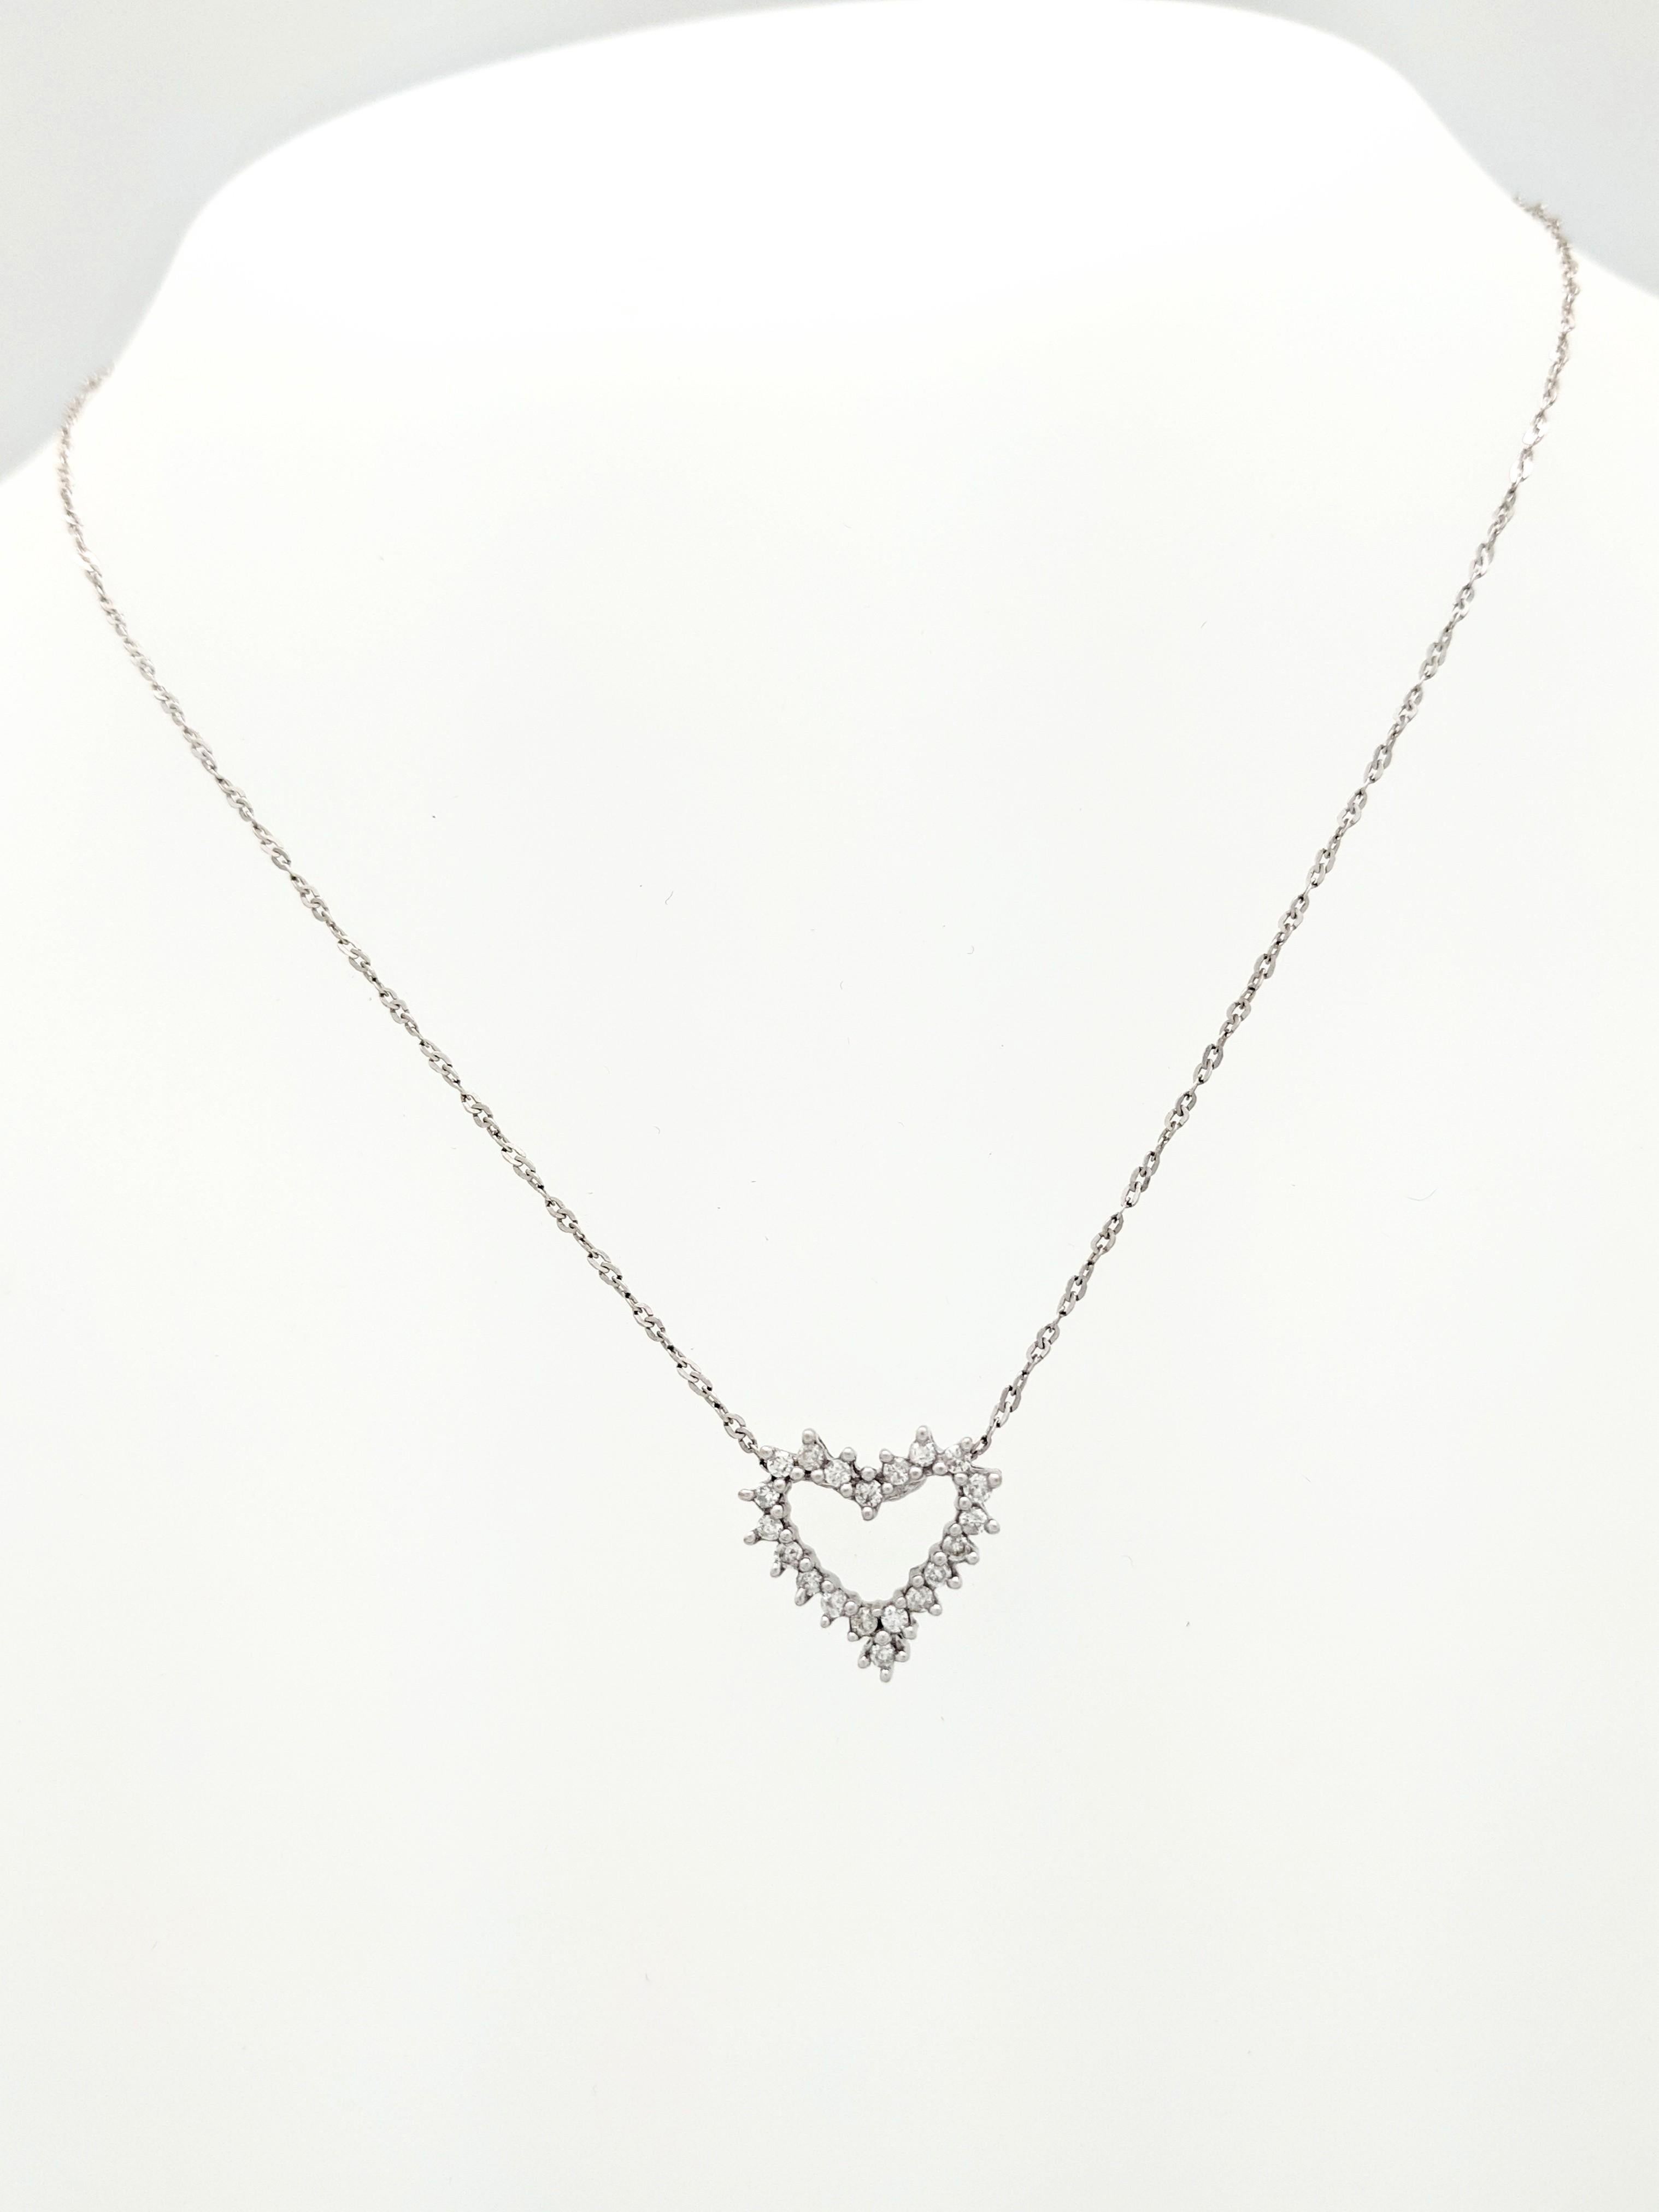 14K White Gold Diamond Heart Pendant Necklace

HJL:2018.000

You are viewing a beautiful diamond heart pendant necklace. The pendant is crafted from 14k white gold and features (20) .01ct round brilliant cut diamonds for an estimated .20tcw. The